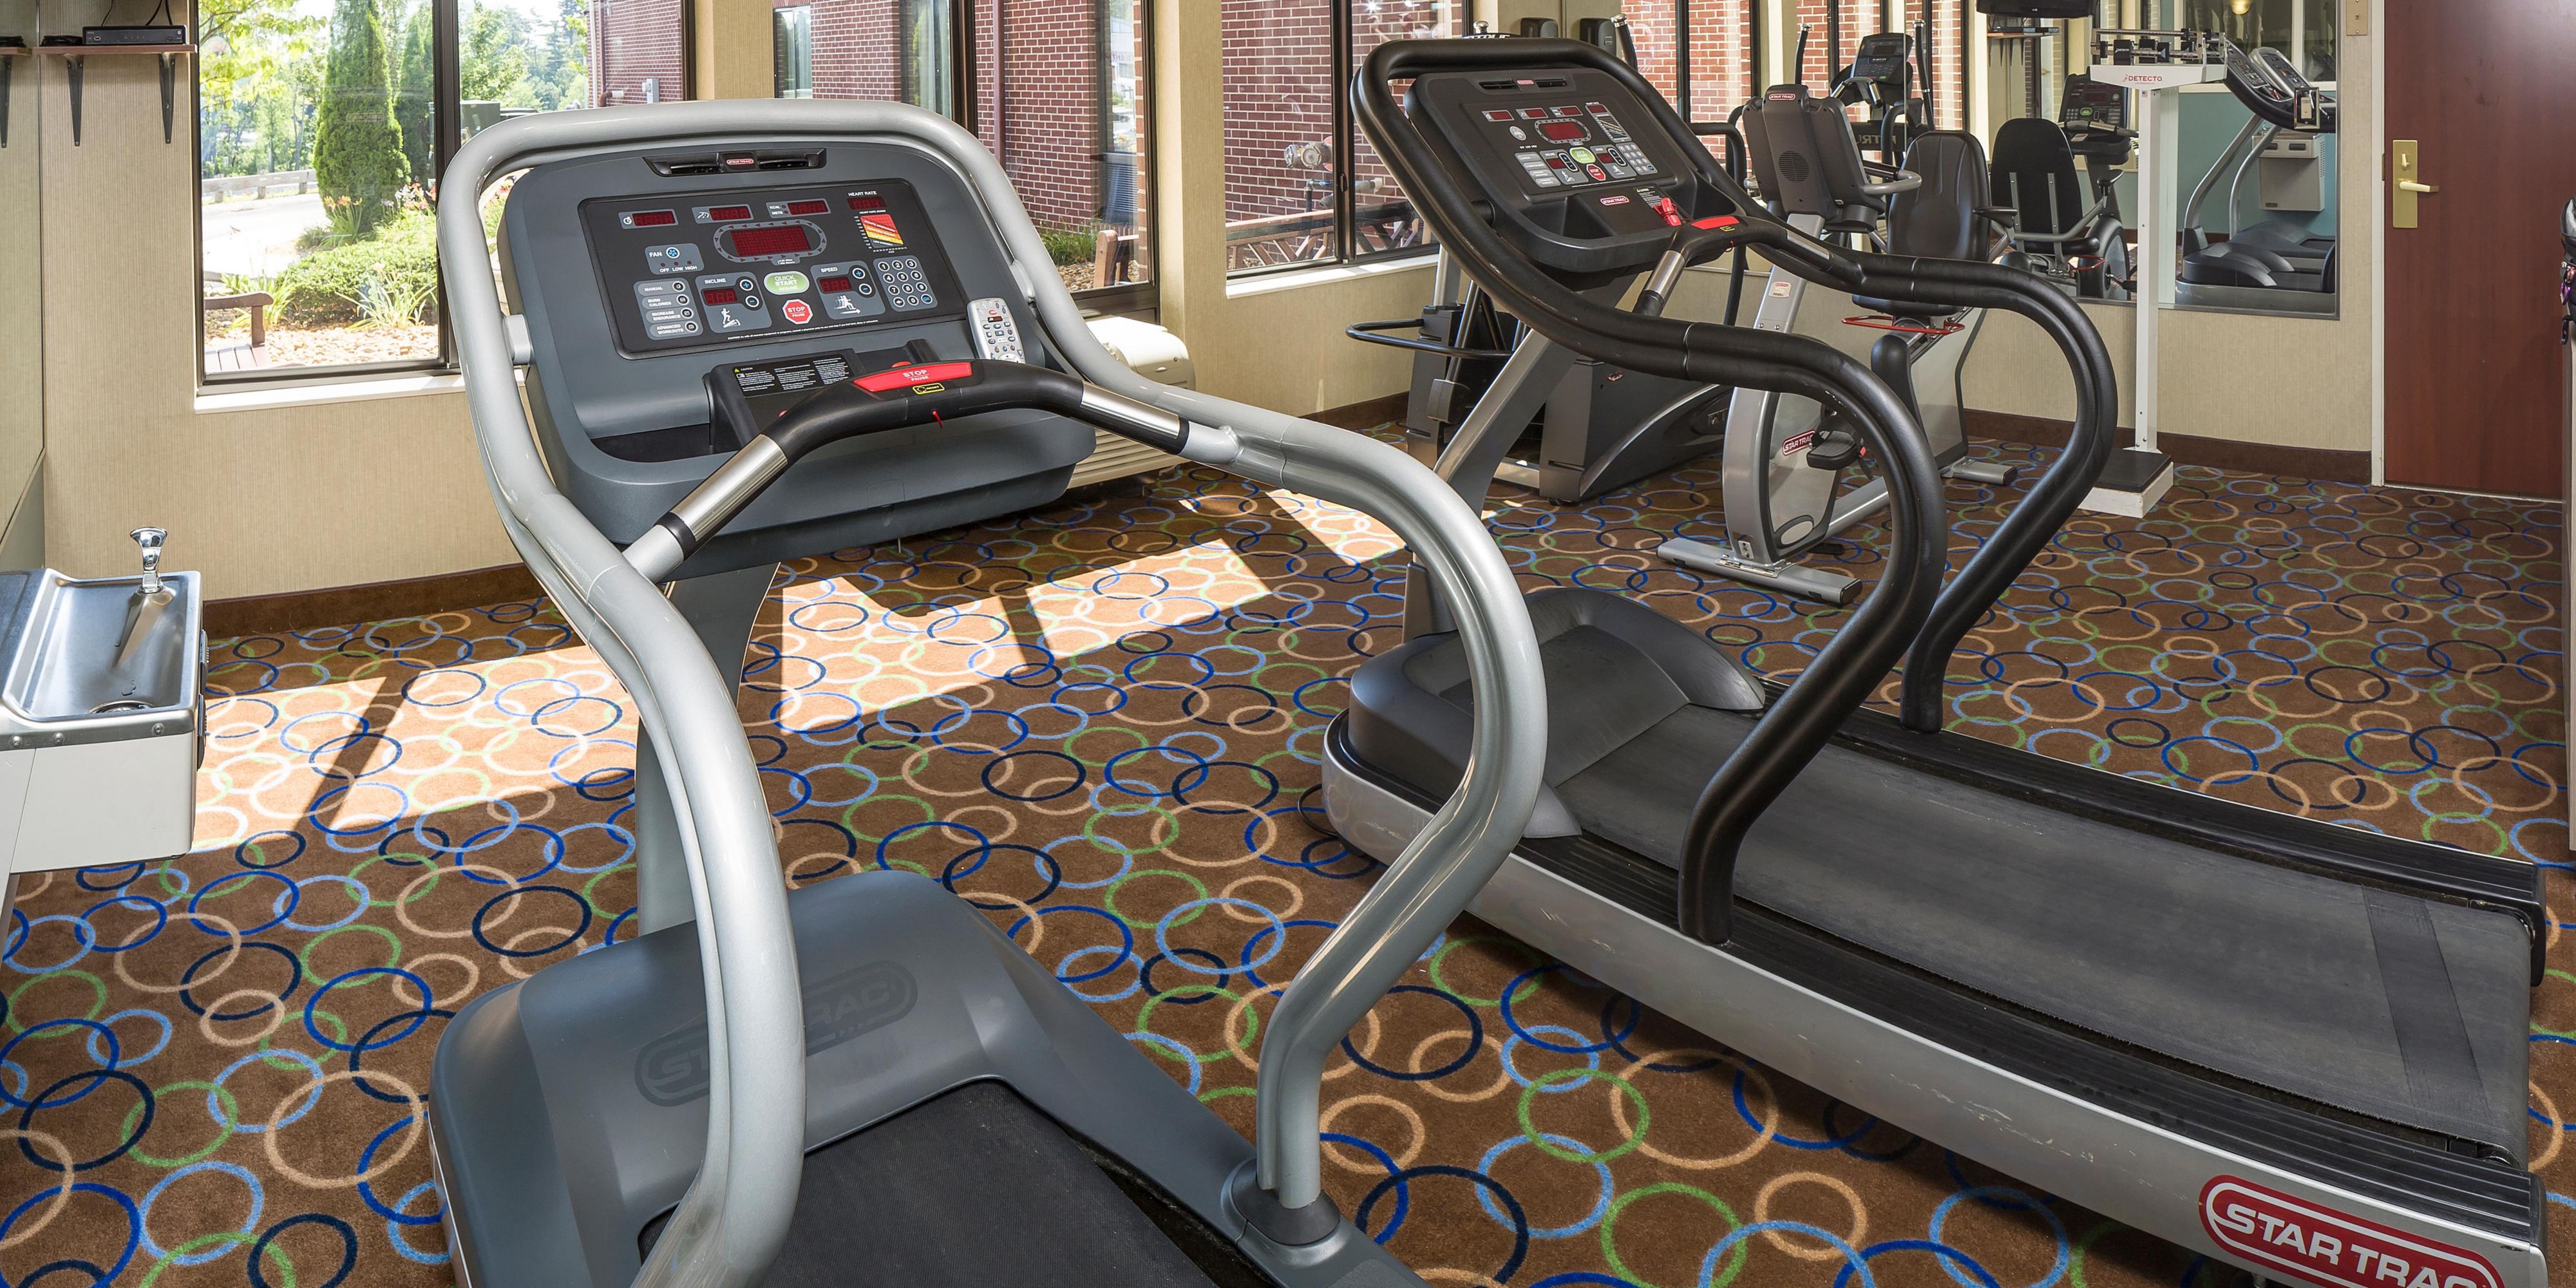 Includes 1 stationary cycle machine, 2 treadmills, 1 elliptical machine and free weights. 